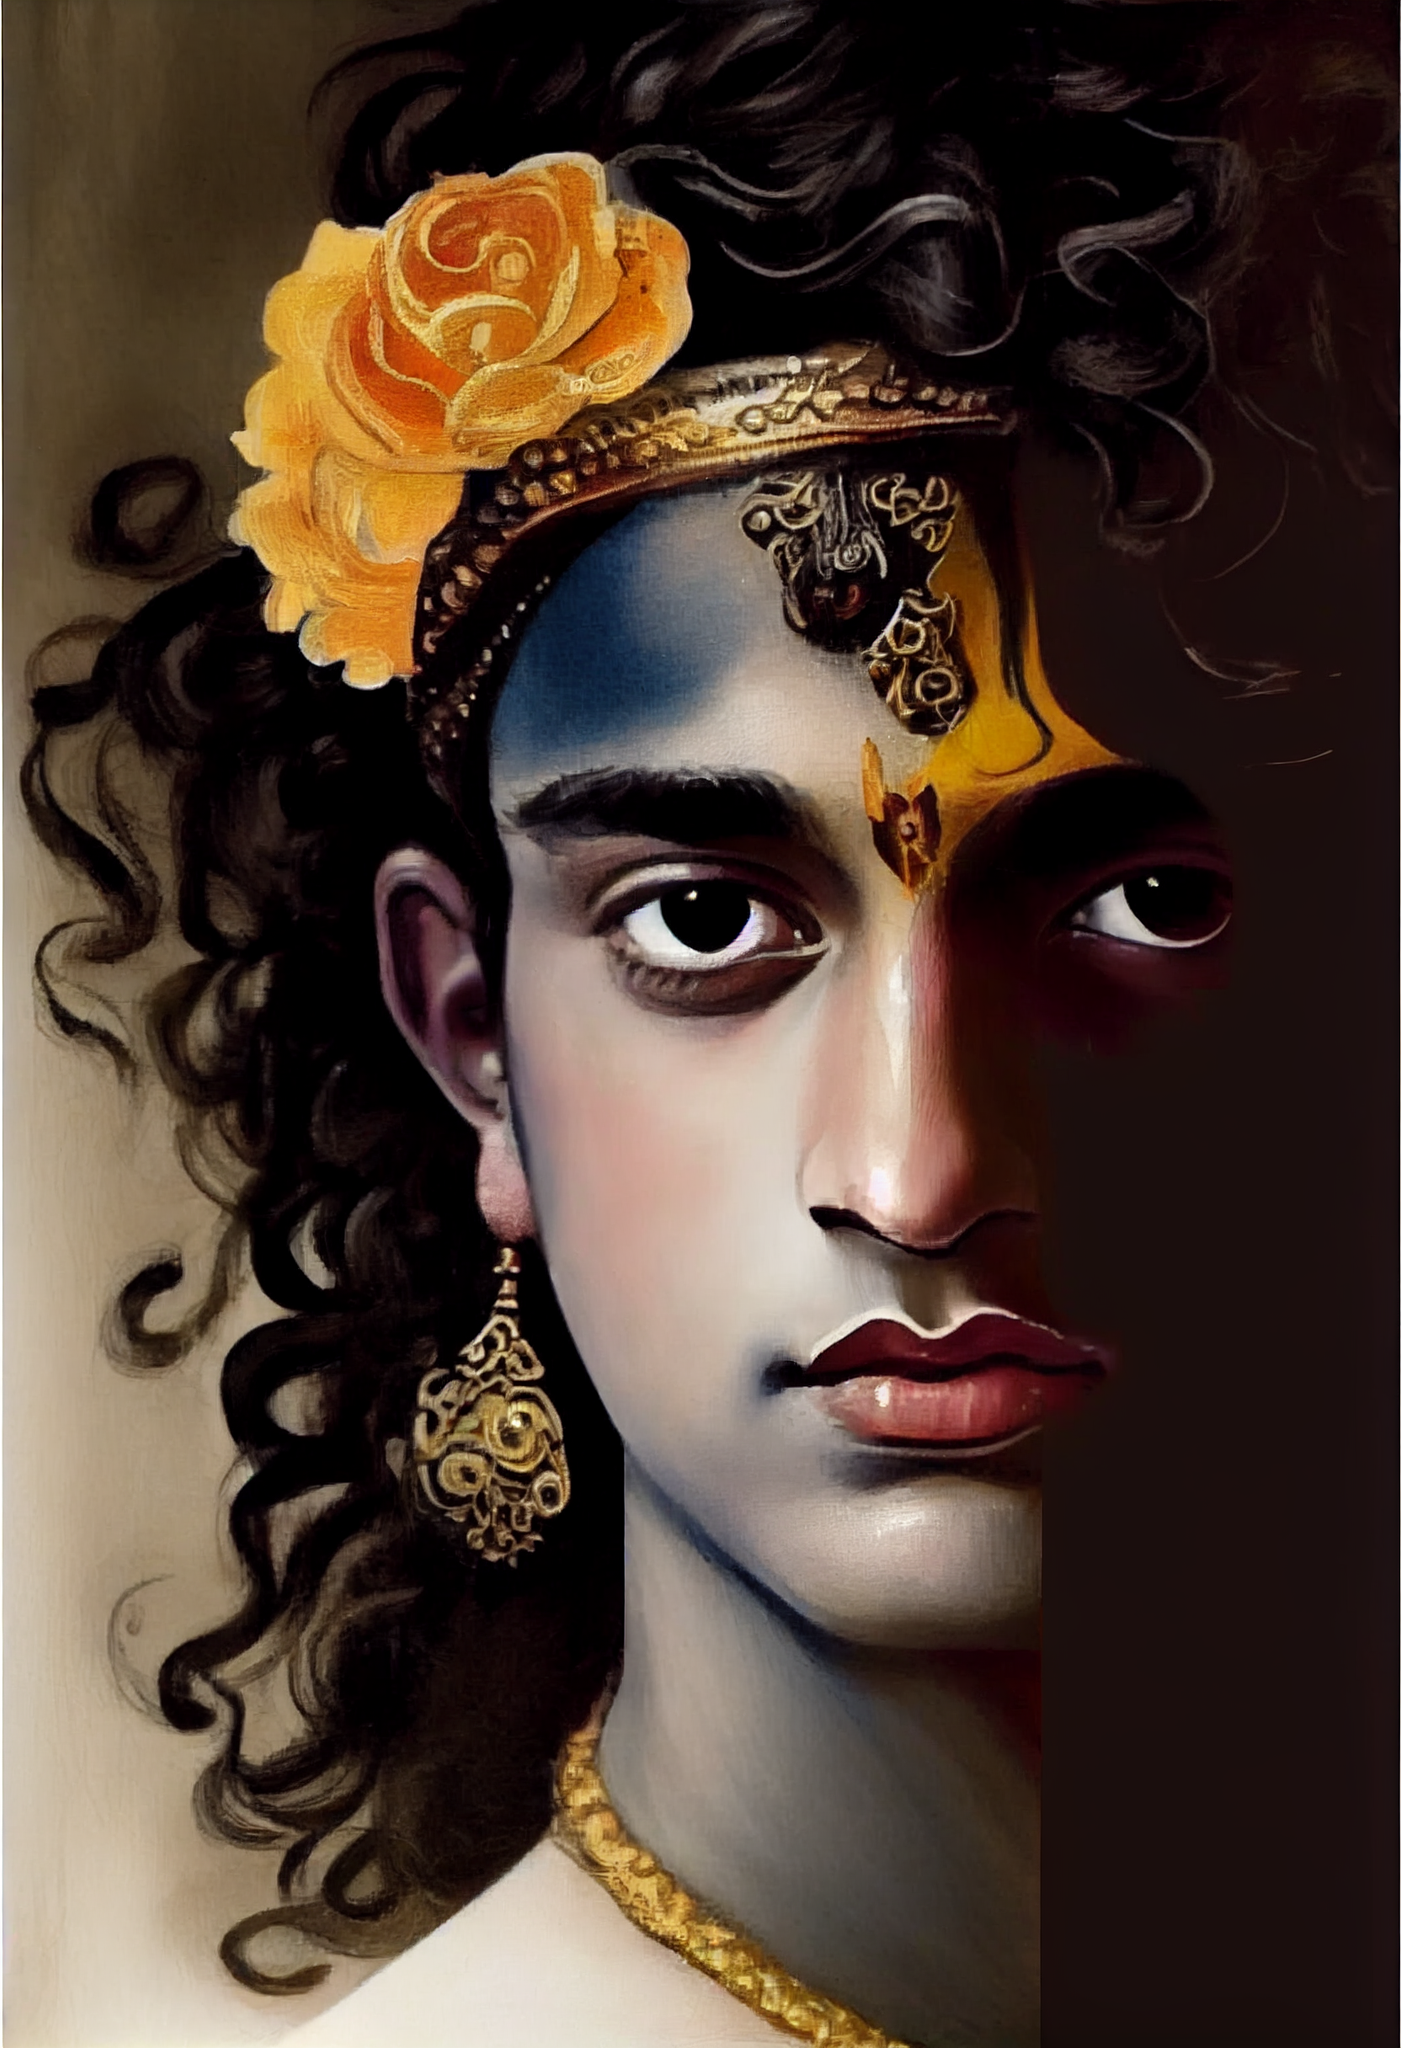 Divine Beauty in Print: Oil Color Portrait Print of Lord Krishna's Face